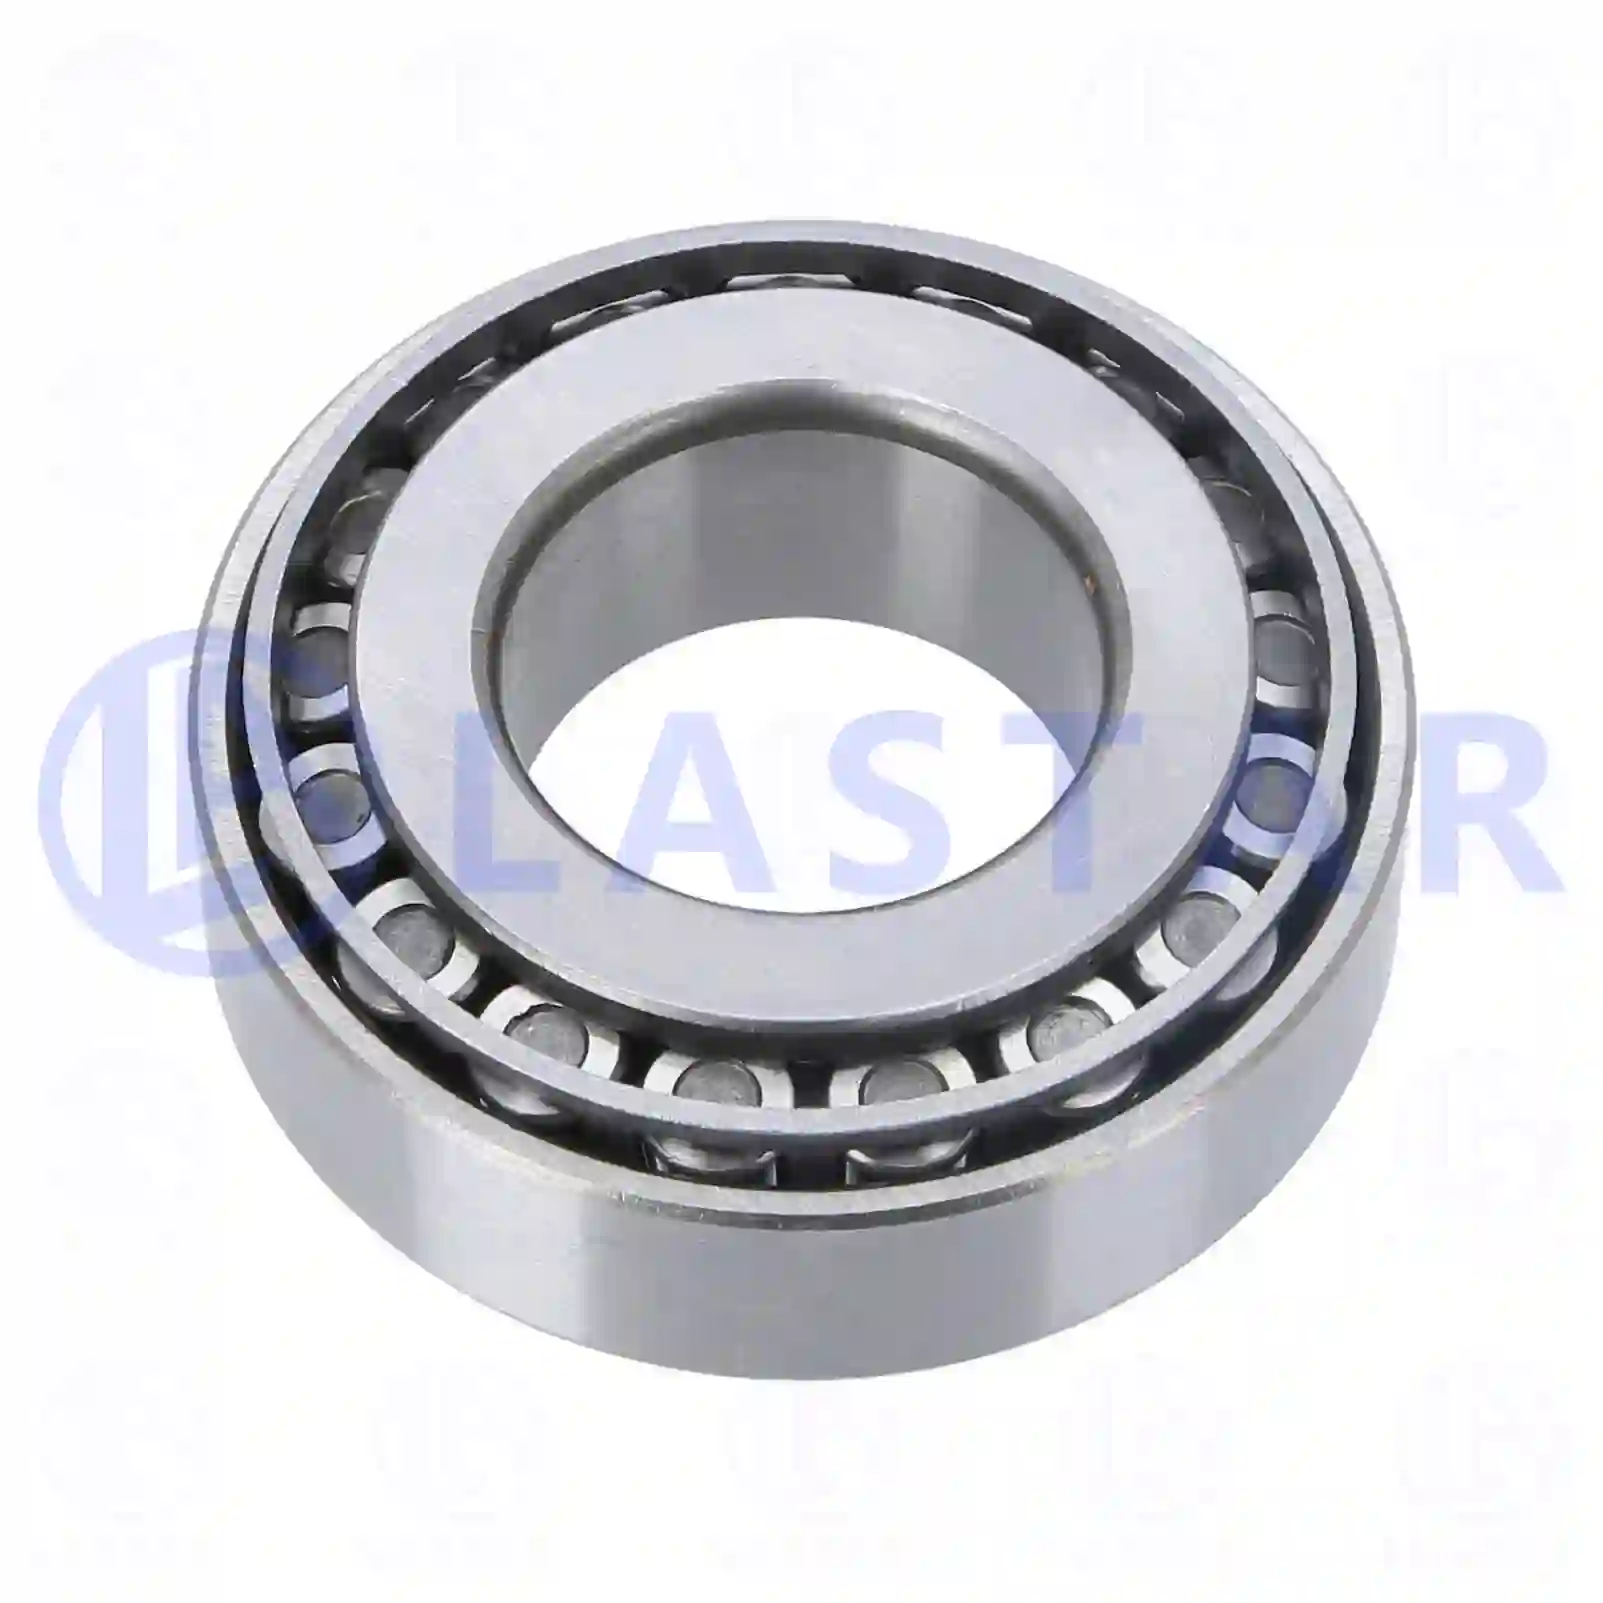 Tapered roller bearing, 77724816, ABL5781, ABU8700, 01905300, 01564990, 01905300, 3661013600, 272716, 354076, 022370SI, 22370, 52828, 183326 ||  77724816 Lastar Spare Part | Truck Spare Parts, Auotomotive Spare Parts Tapered roller bearing, 77724816, ABL5781, ABU8700, 01905300, 01564990, 01905300, 3661013600, 272716, 354076, 022370SI, 22370, 52828, 183326 ||  77724816 Lastar Spare Part | Truck Spare Parts, Auotomotive Spare Parts